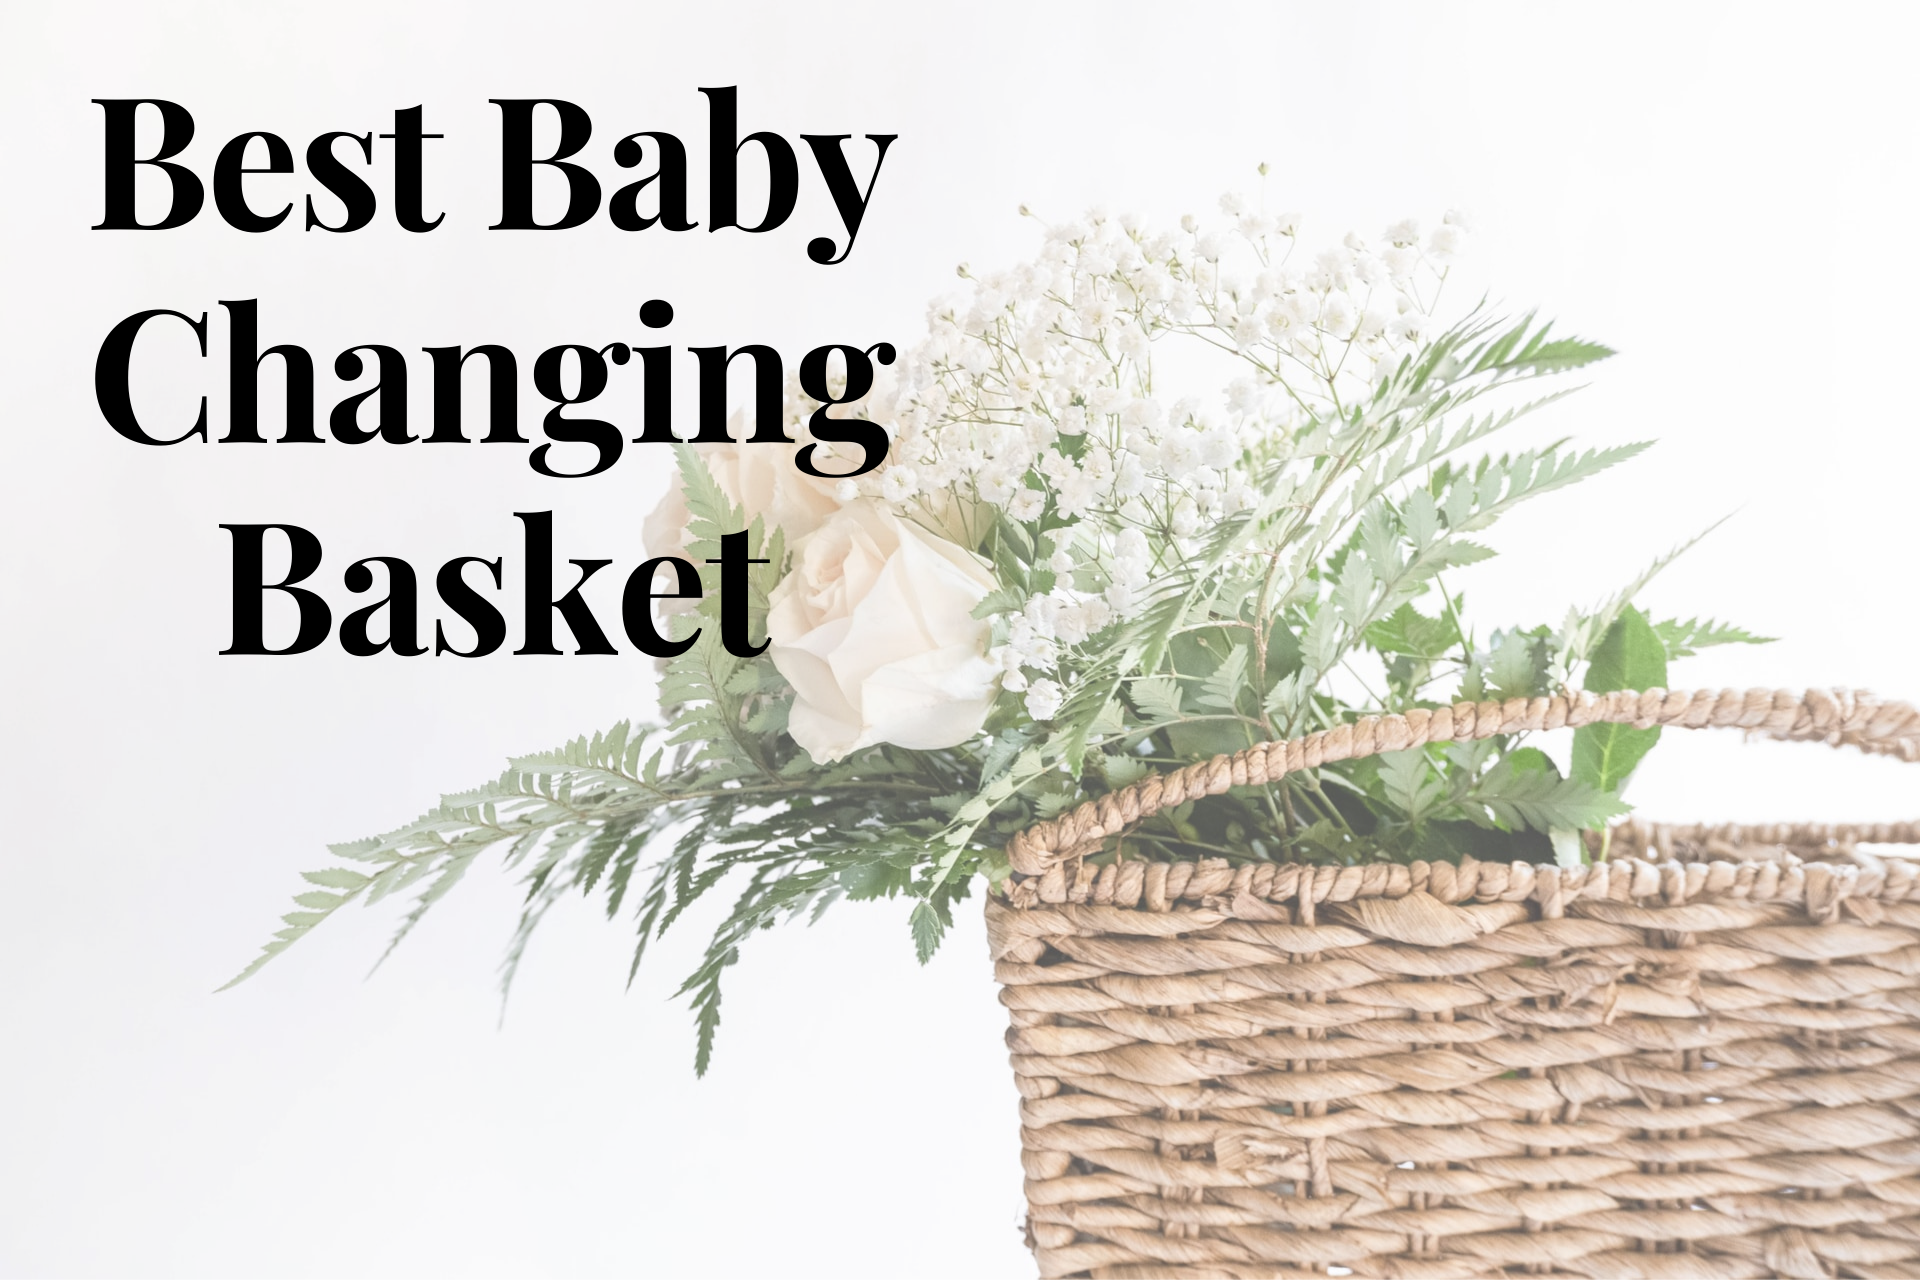 Best Baby Changing Basket